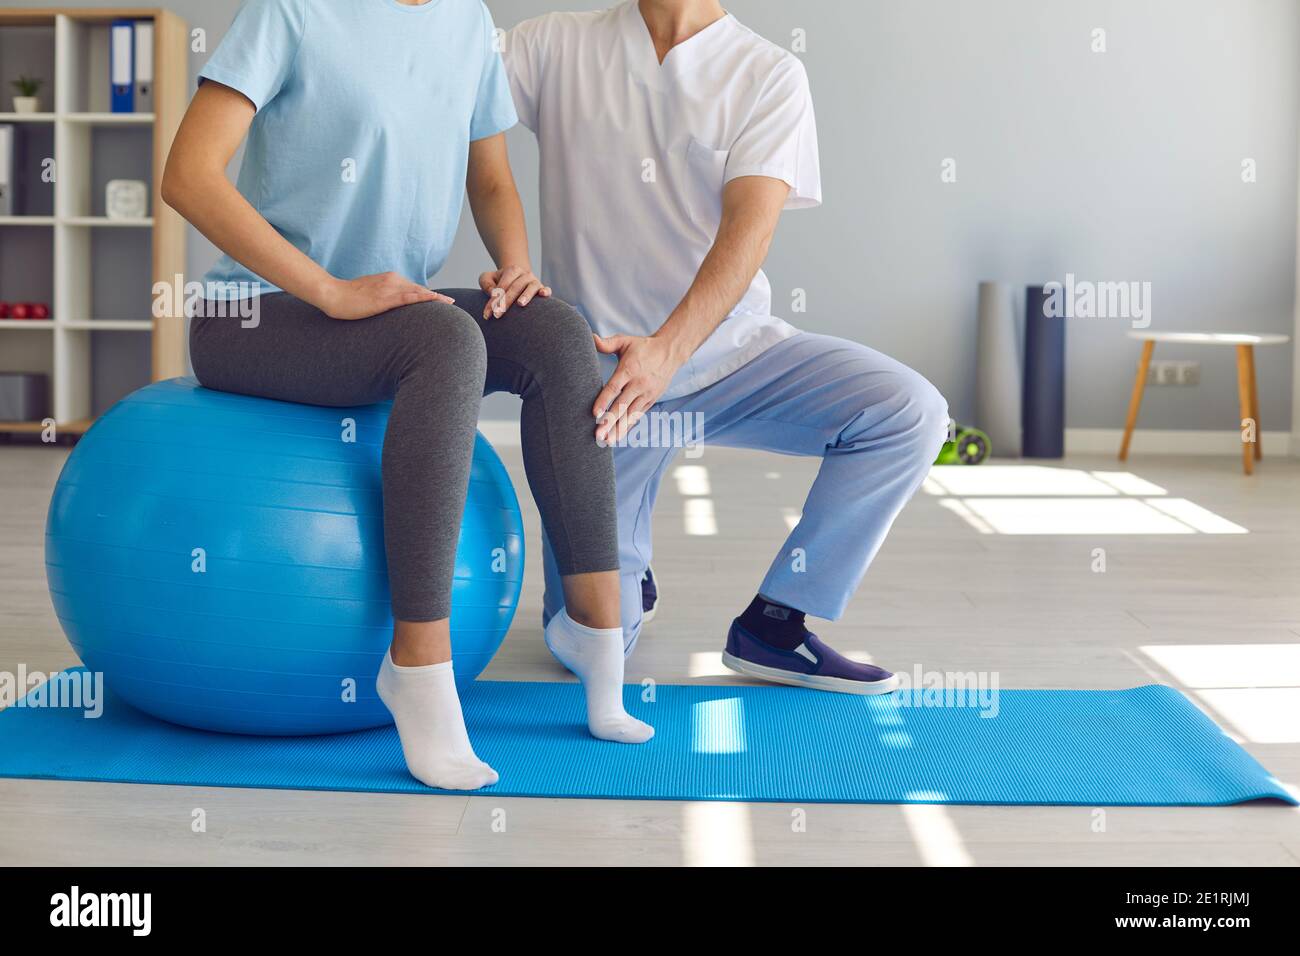 Woman doing exercise on fit ball with professional physiotherapist or chiropractor helping her Stock Photo